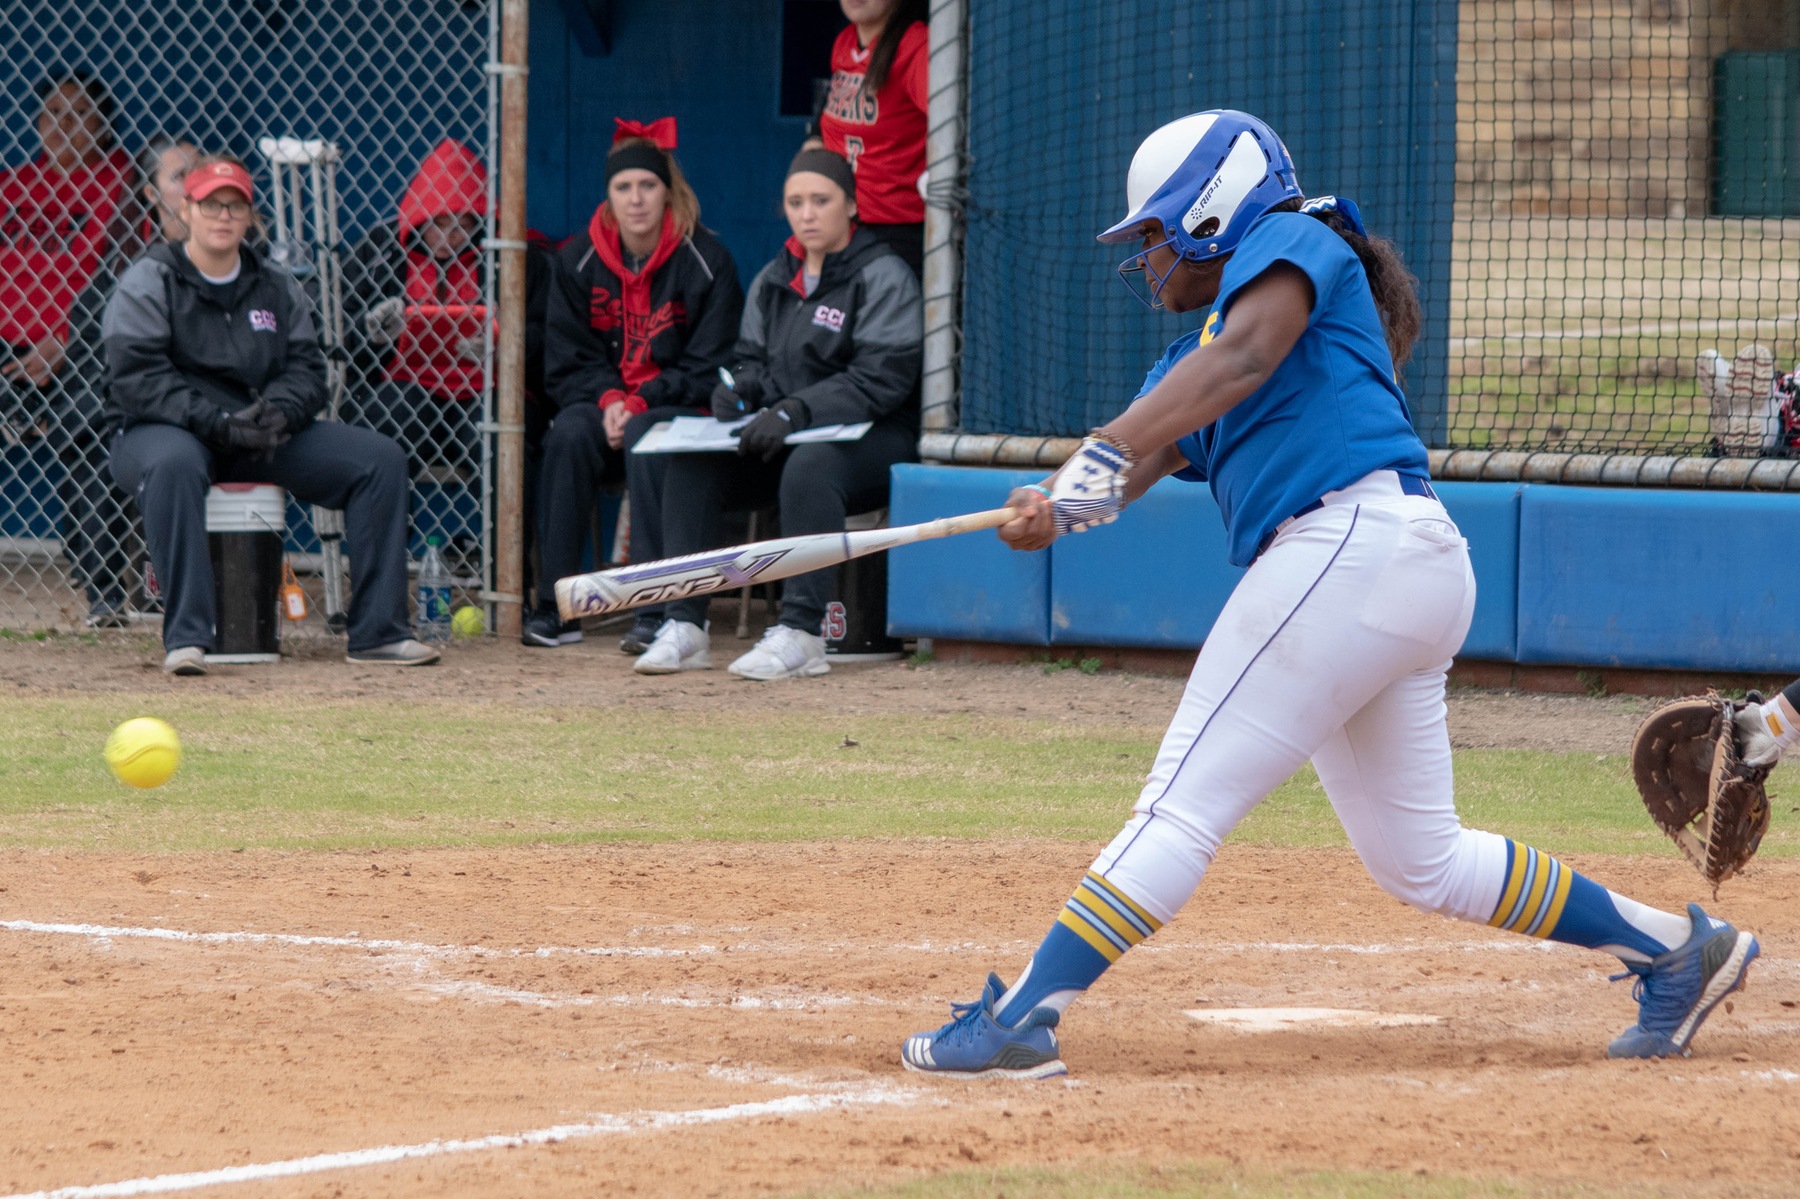 Sydney Green gets a hit during a game earlier this season.